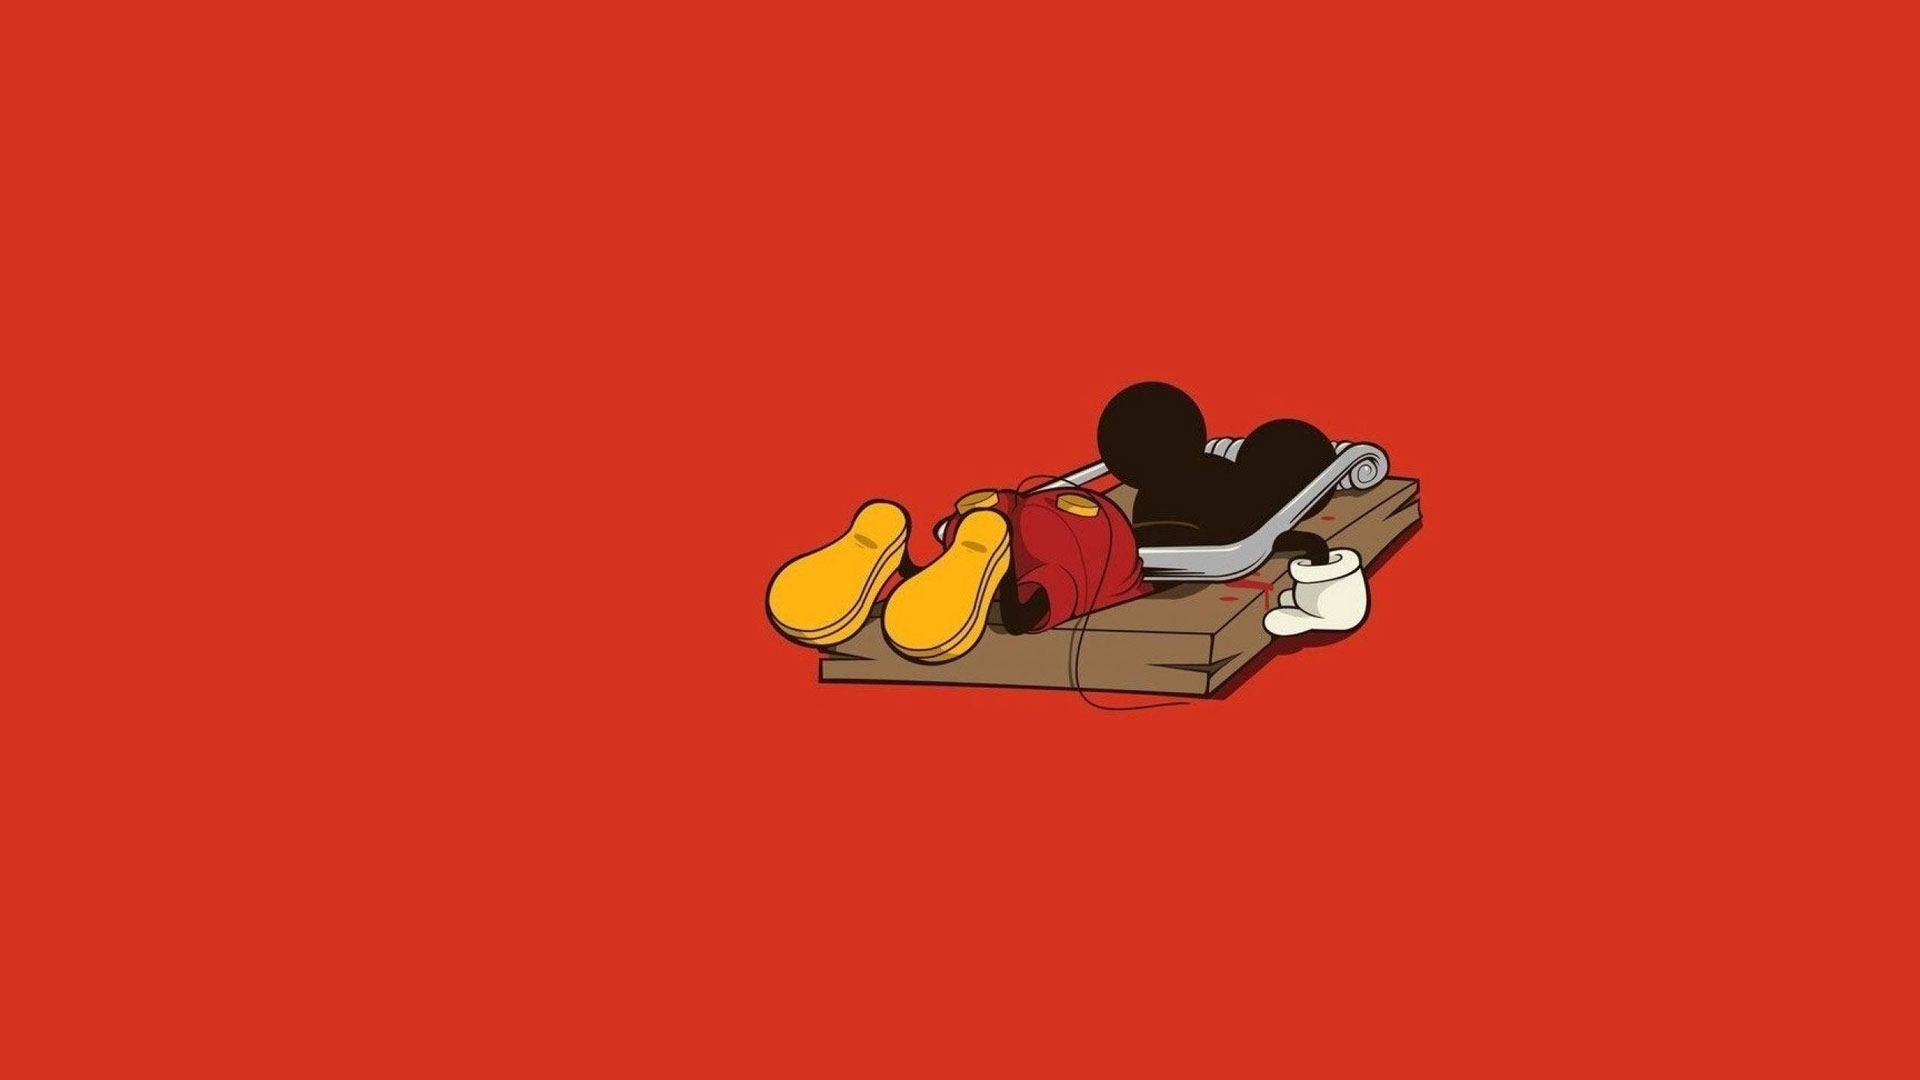 Free Download Mickey Mouse Trap Disney Desktop Wallpapers Computer 1920x1080 For Your Desktop Mobile Tablet Explore 73 Disney Desktop Wallpaper Free Free Disney Desktop Wallpaper Screensavers Free Disney World